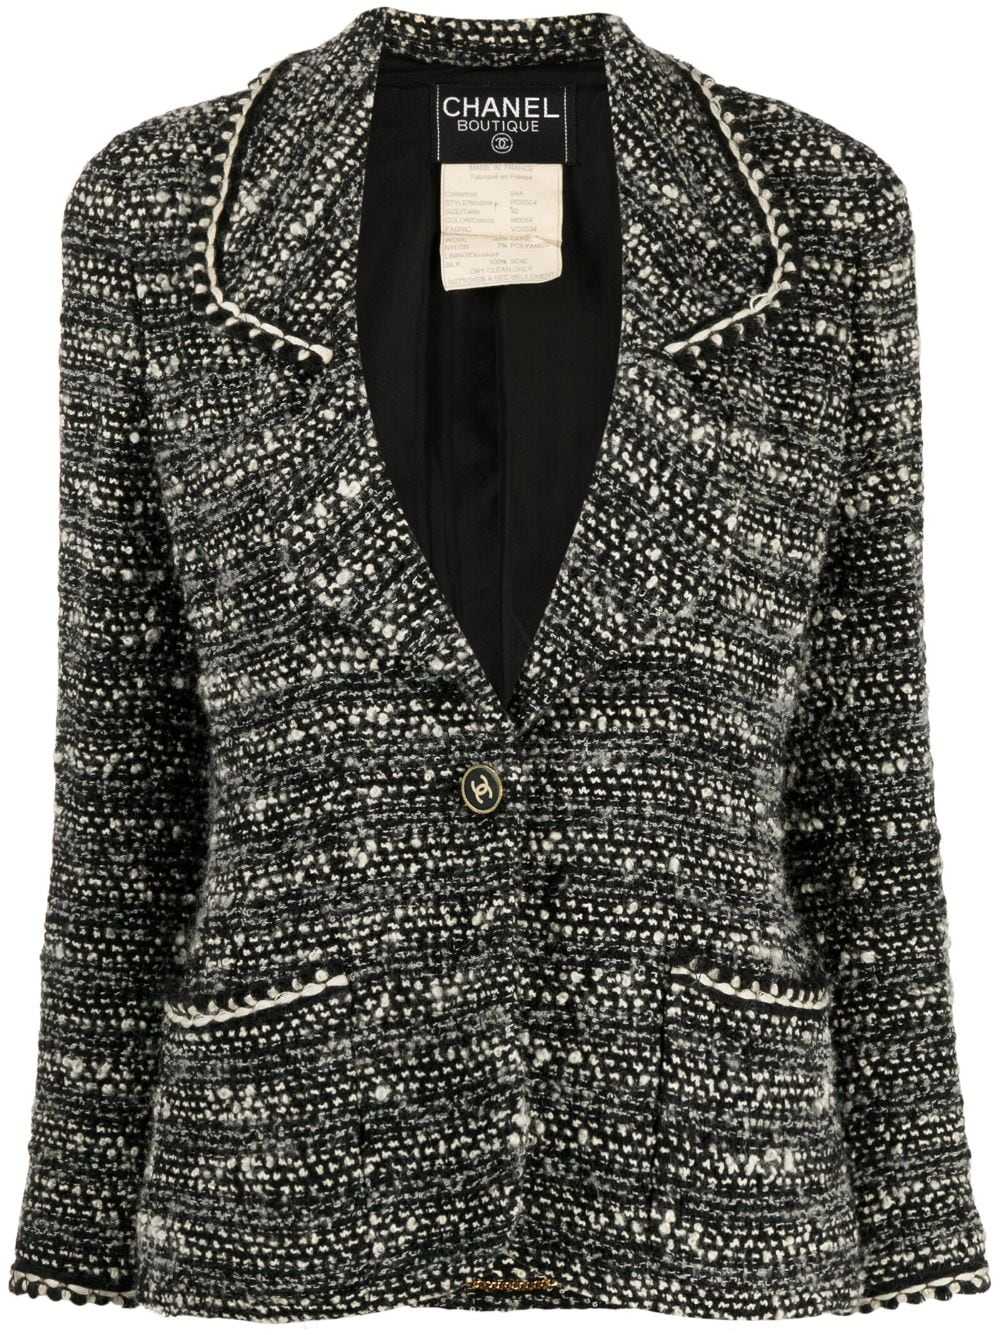 CHANEL Pre-Owned 1994 single-breasted bouclé jack… - image 1